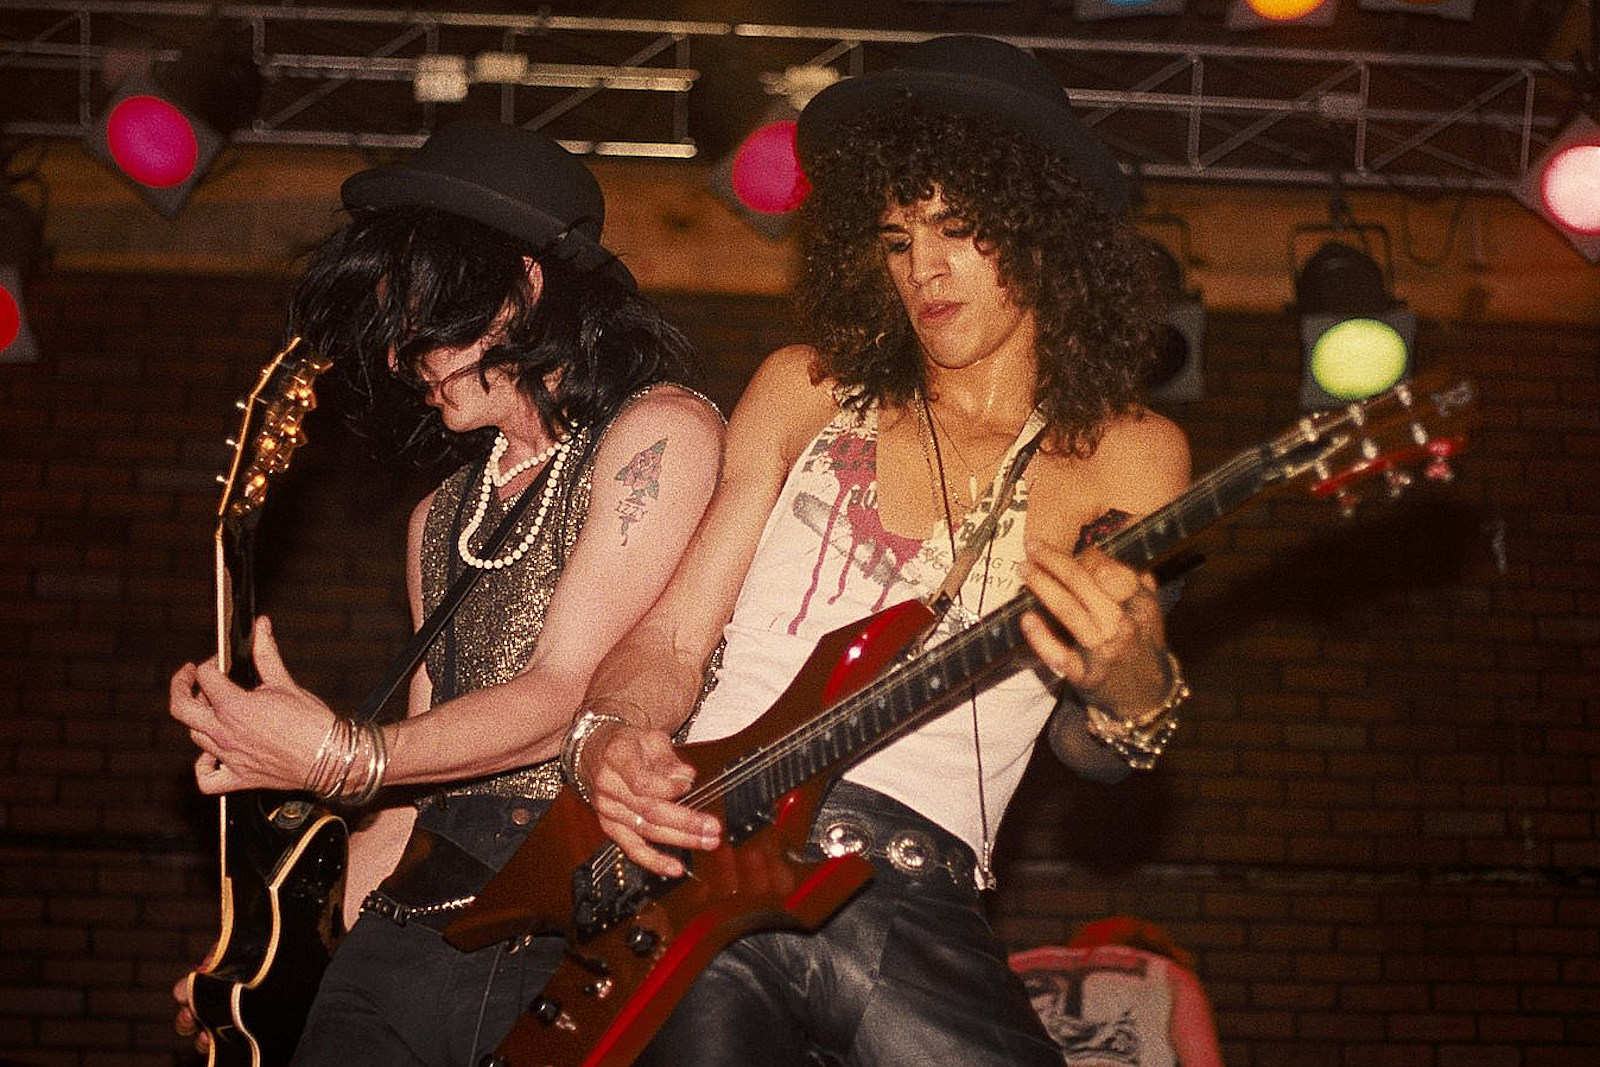 The Guns N' Roses song Slash is the most proud of